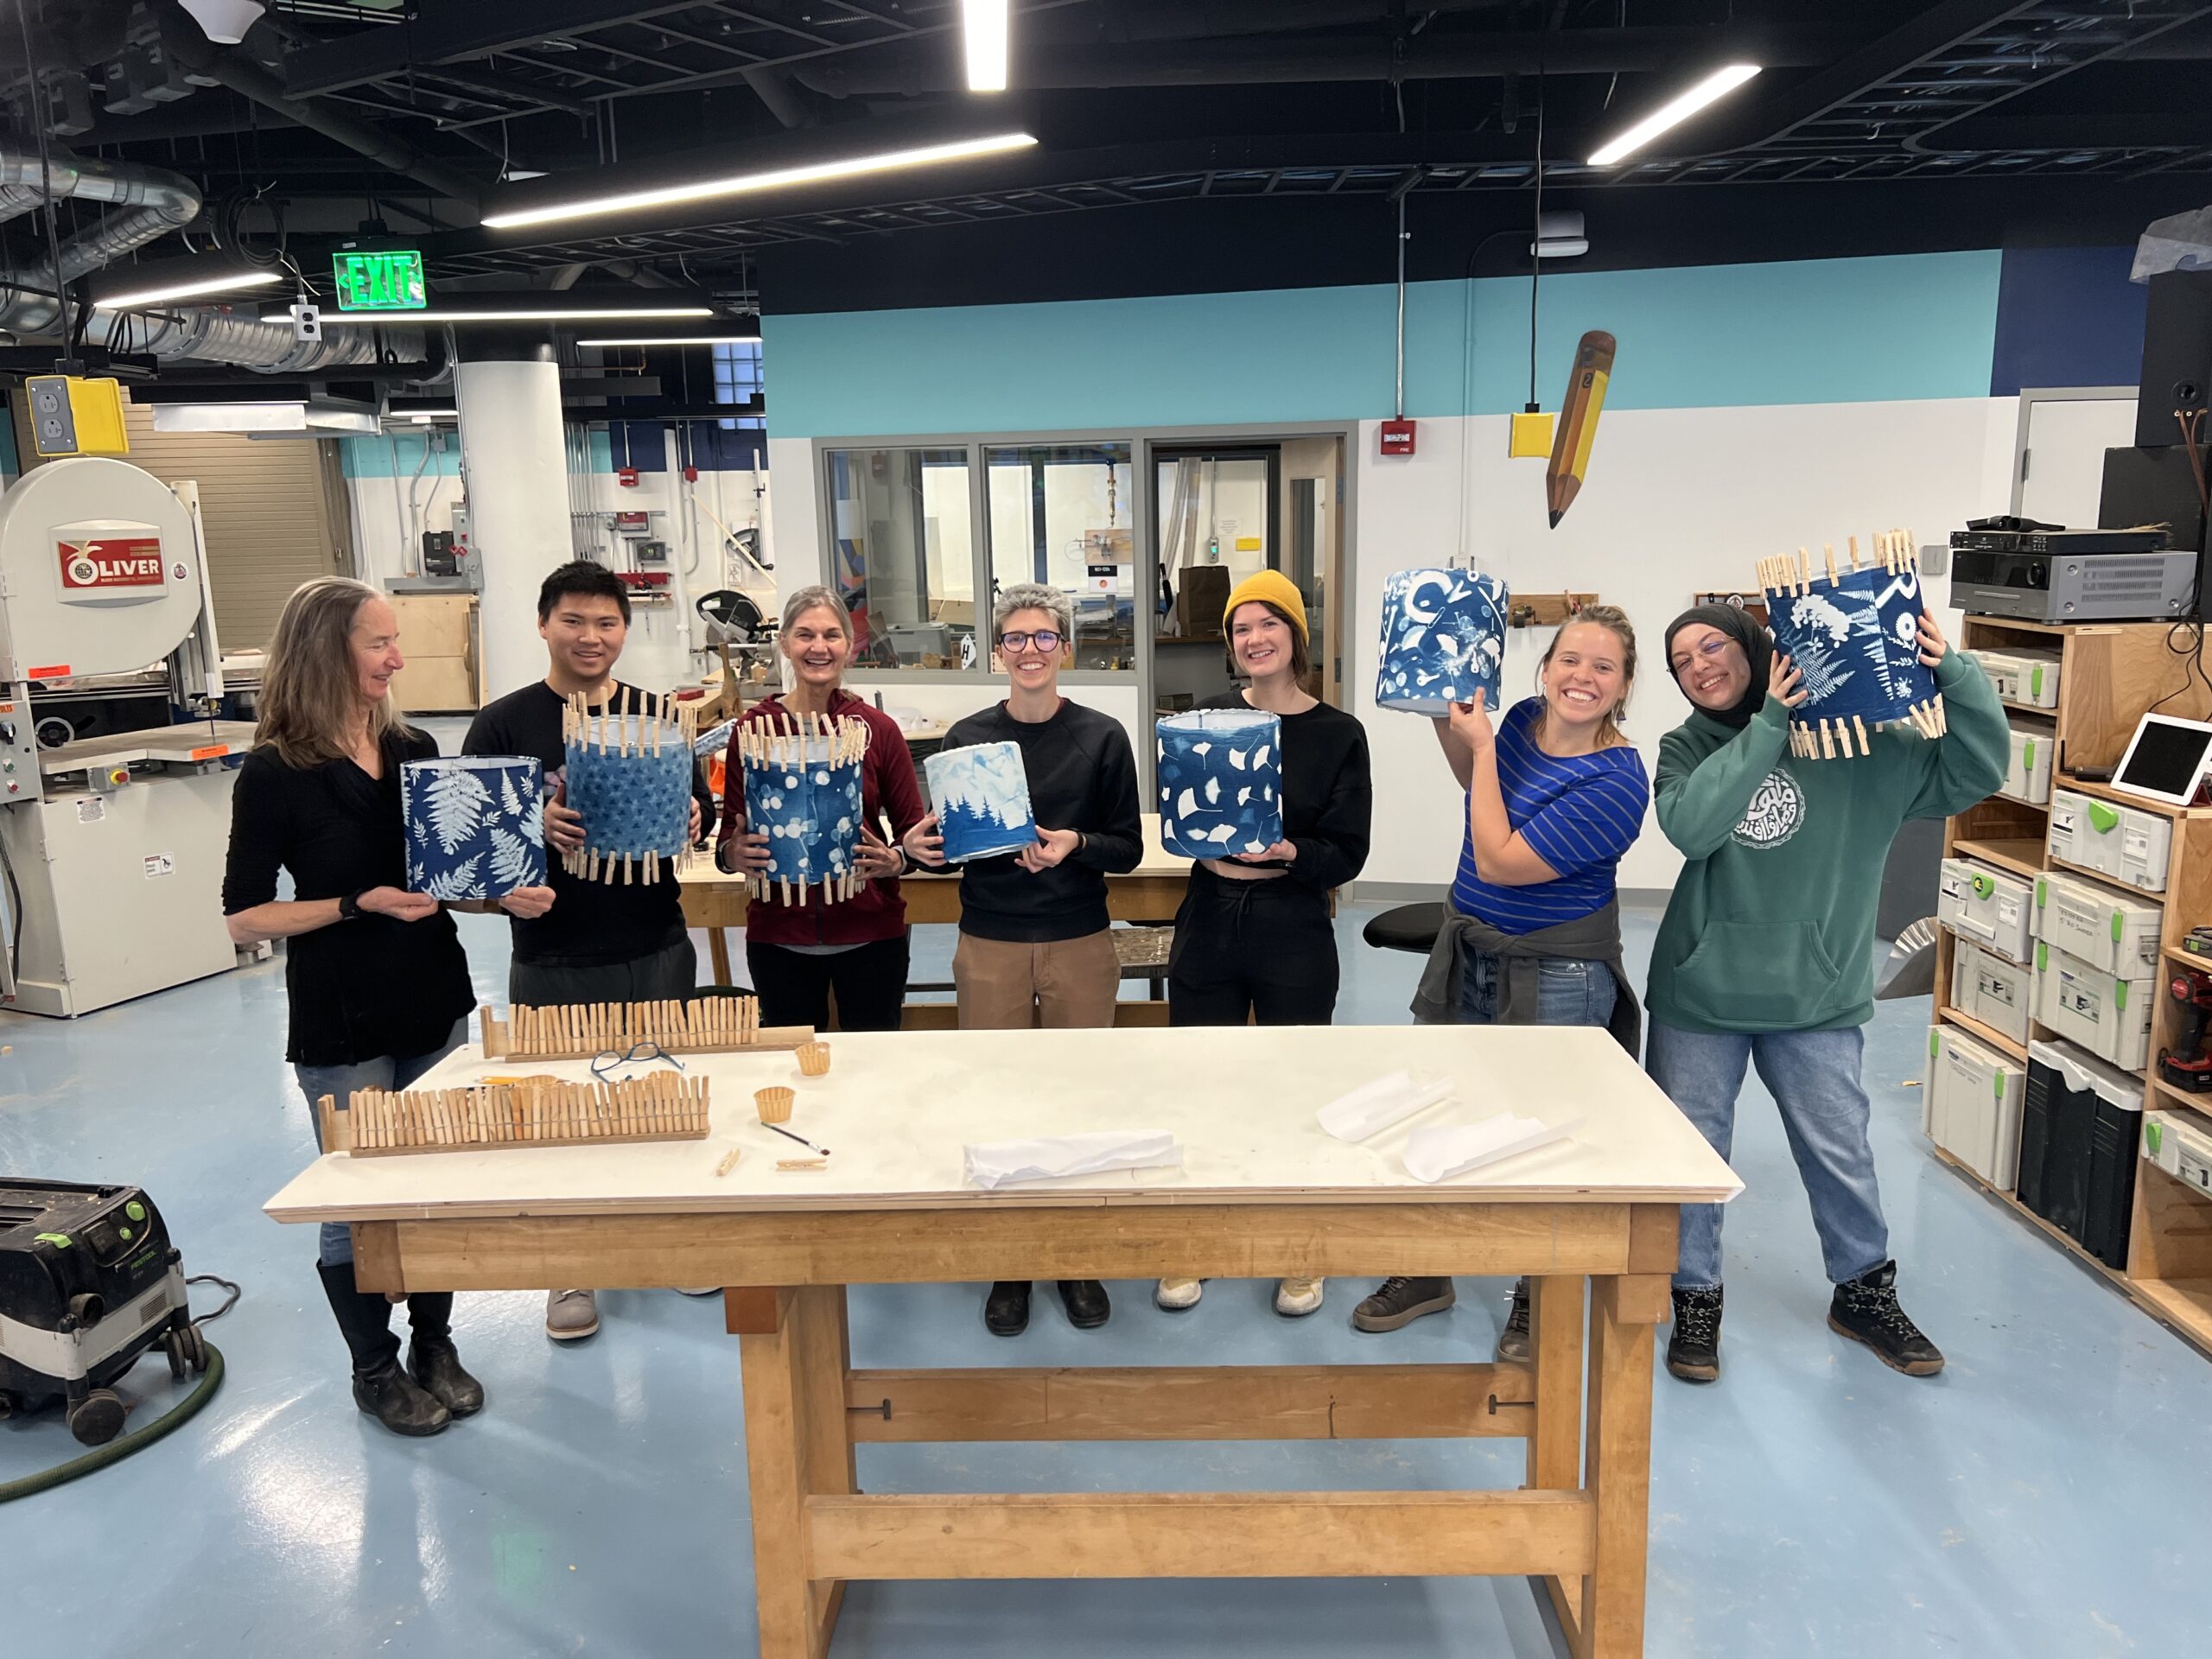 My mom and I co-taught a cyanotype lamp shade making class. In a machine shop with mostly large and dangerous tools, it is important to me that we also have offerings with lower barriers. This class was a resounding success in that way.